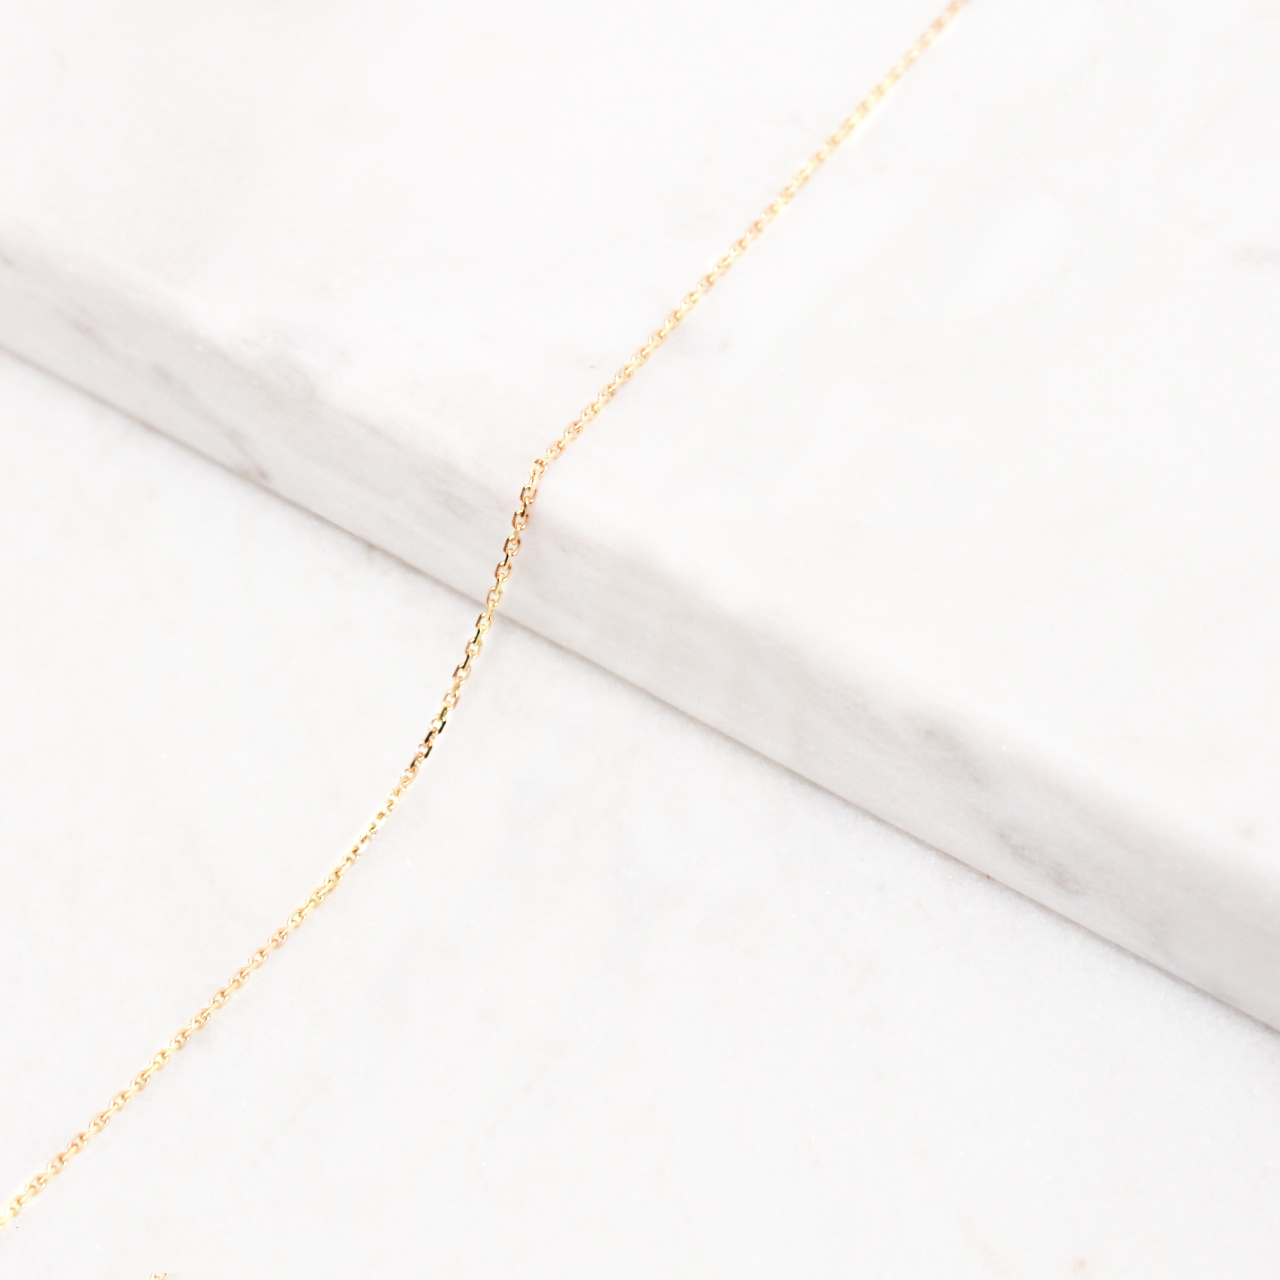 18k yellow gold filed cable chain